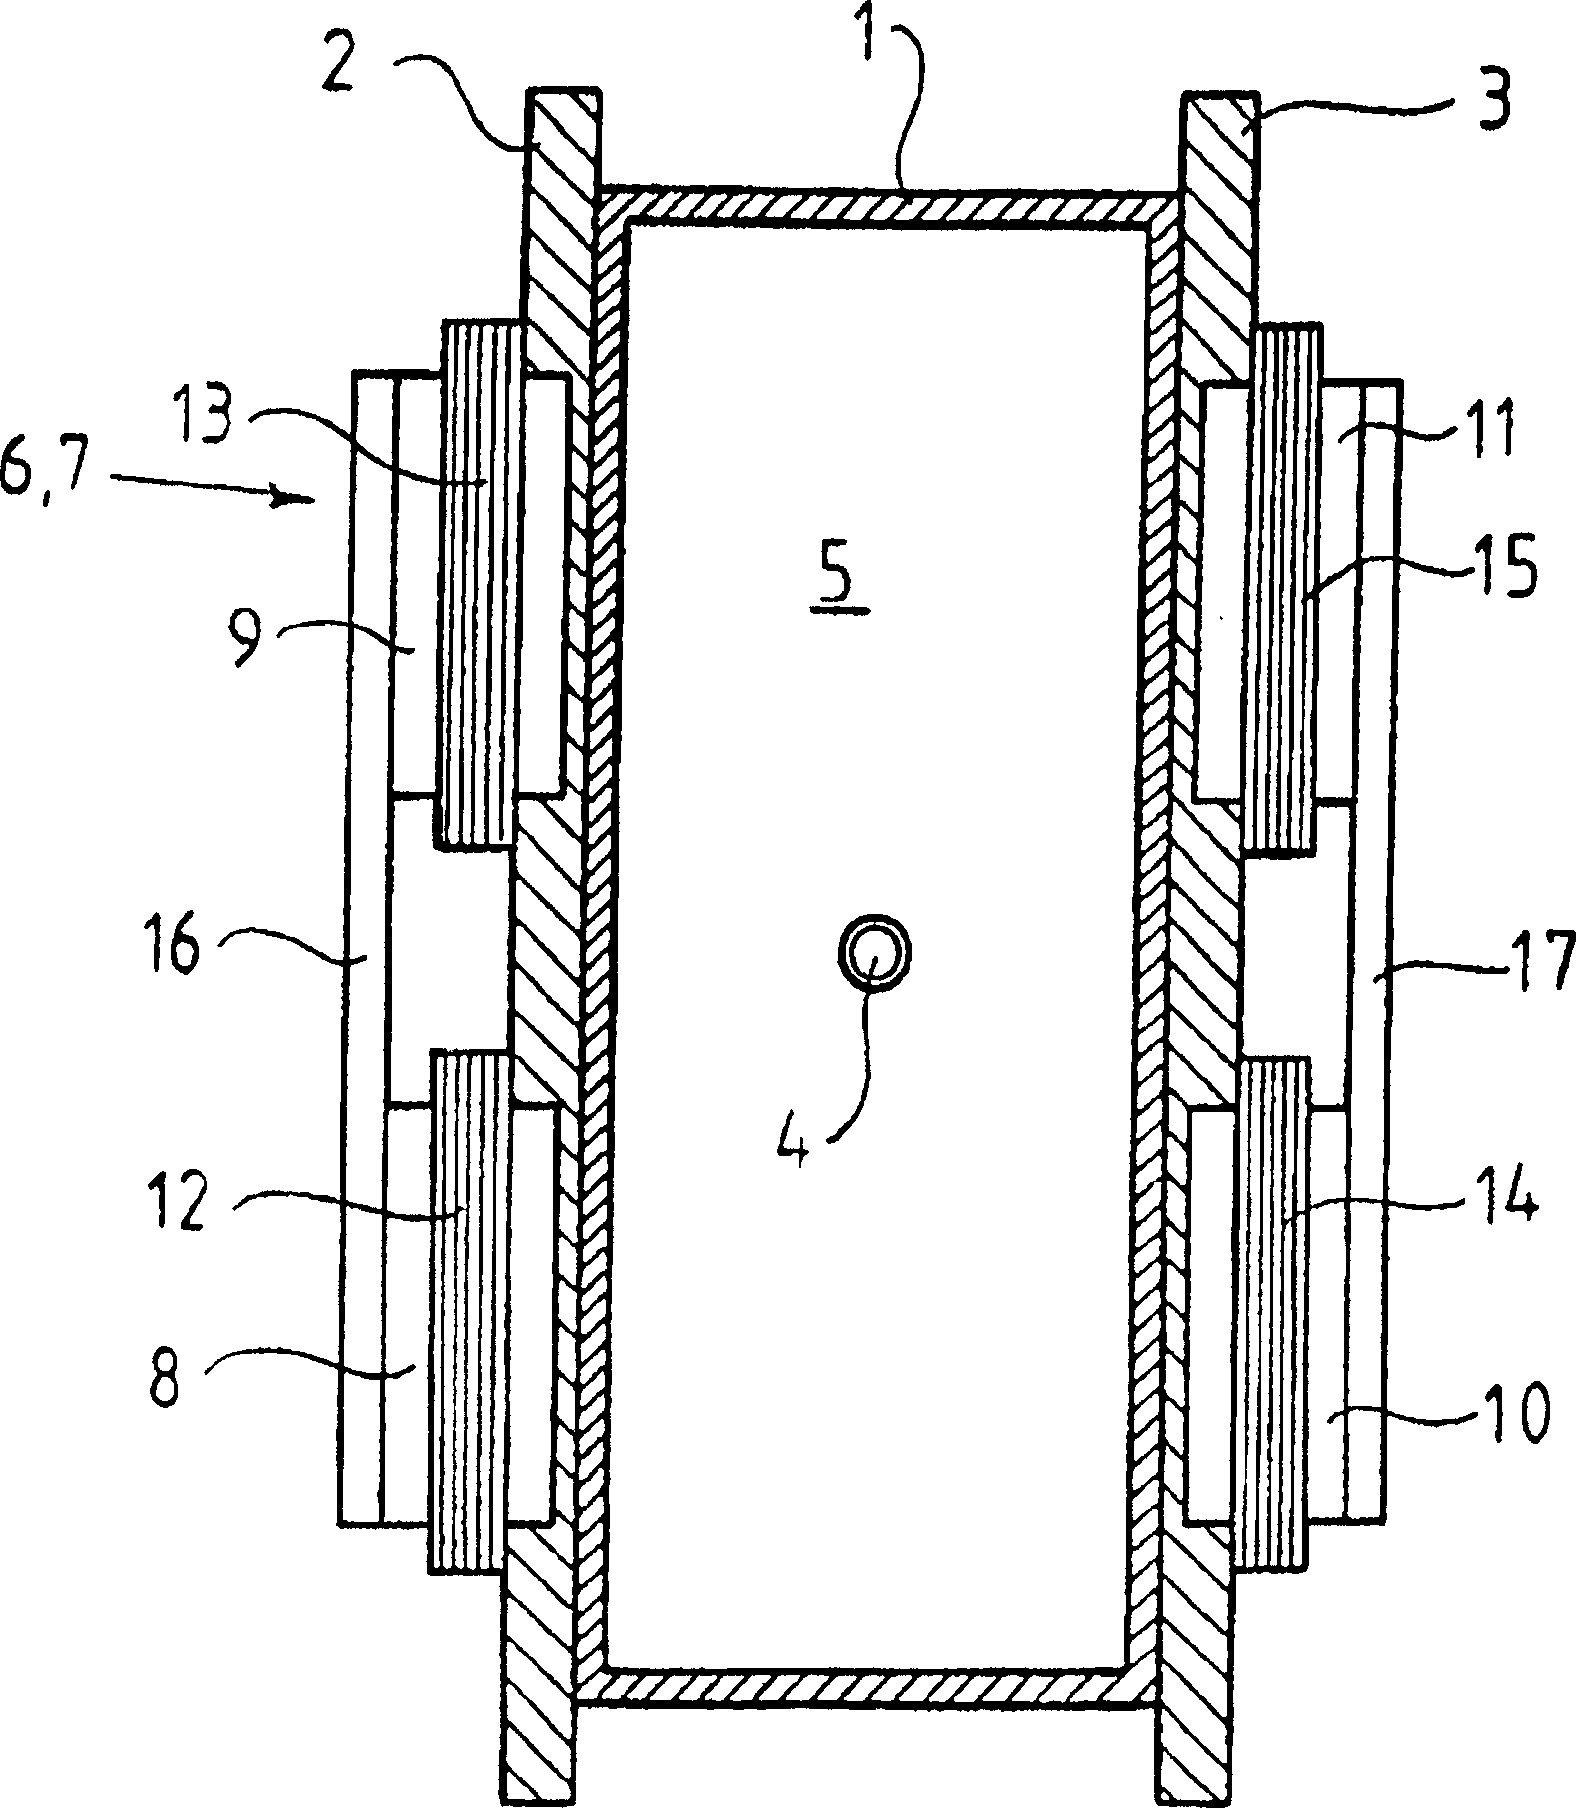 A method and device for continuous casting of metals